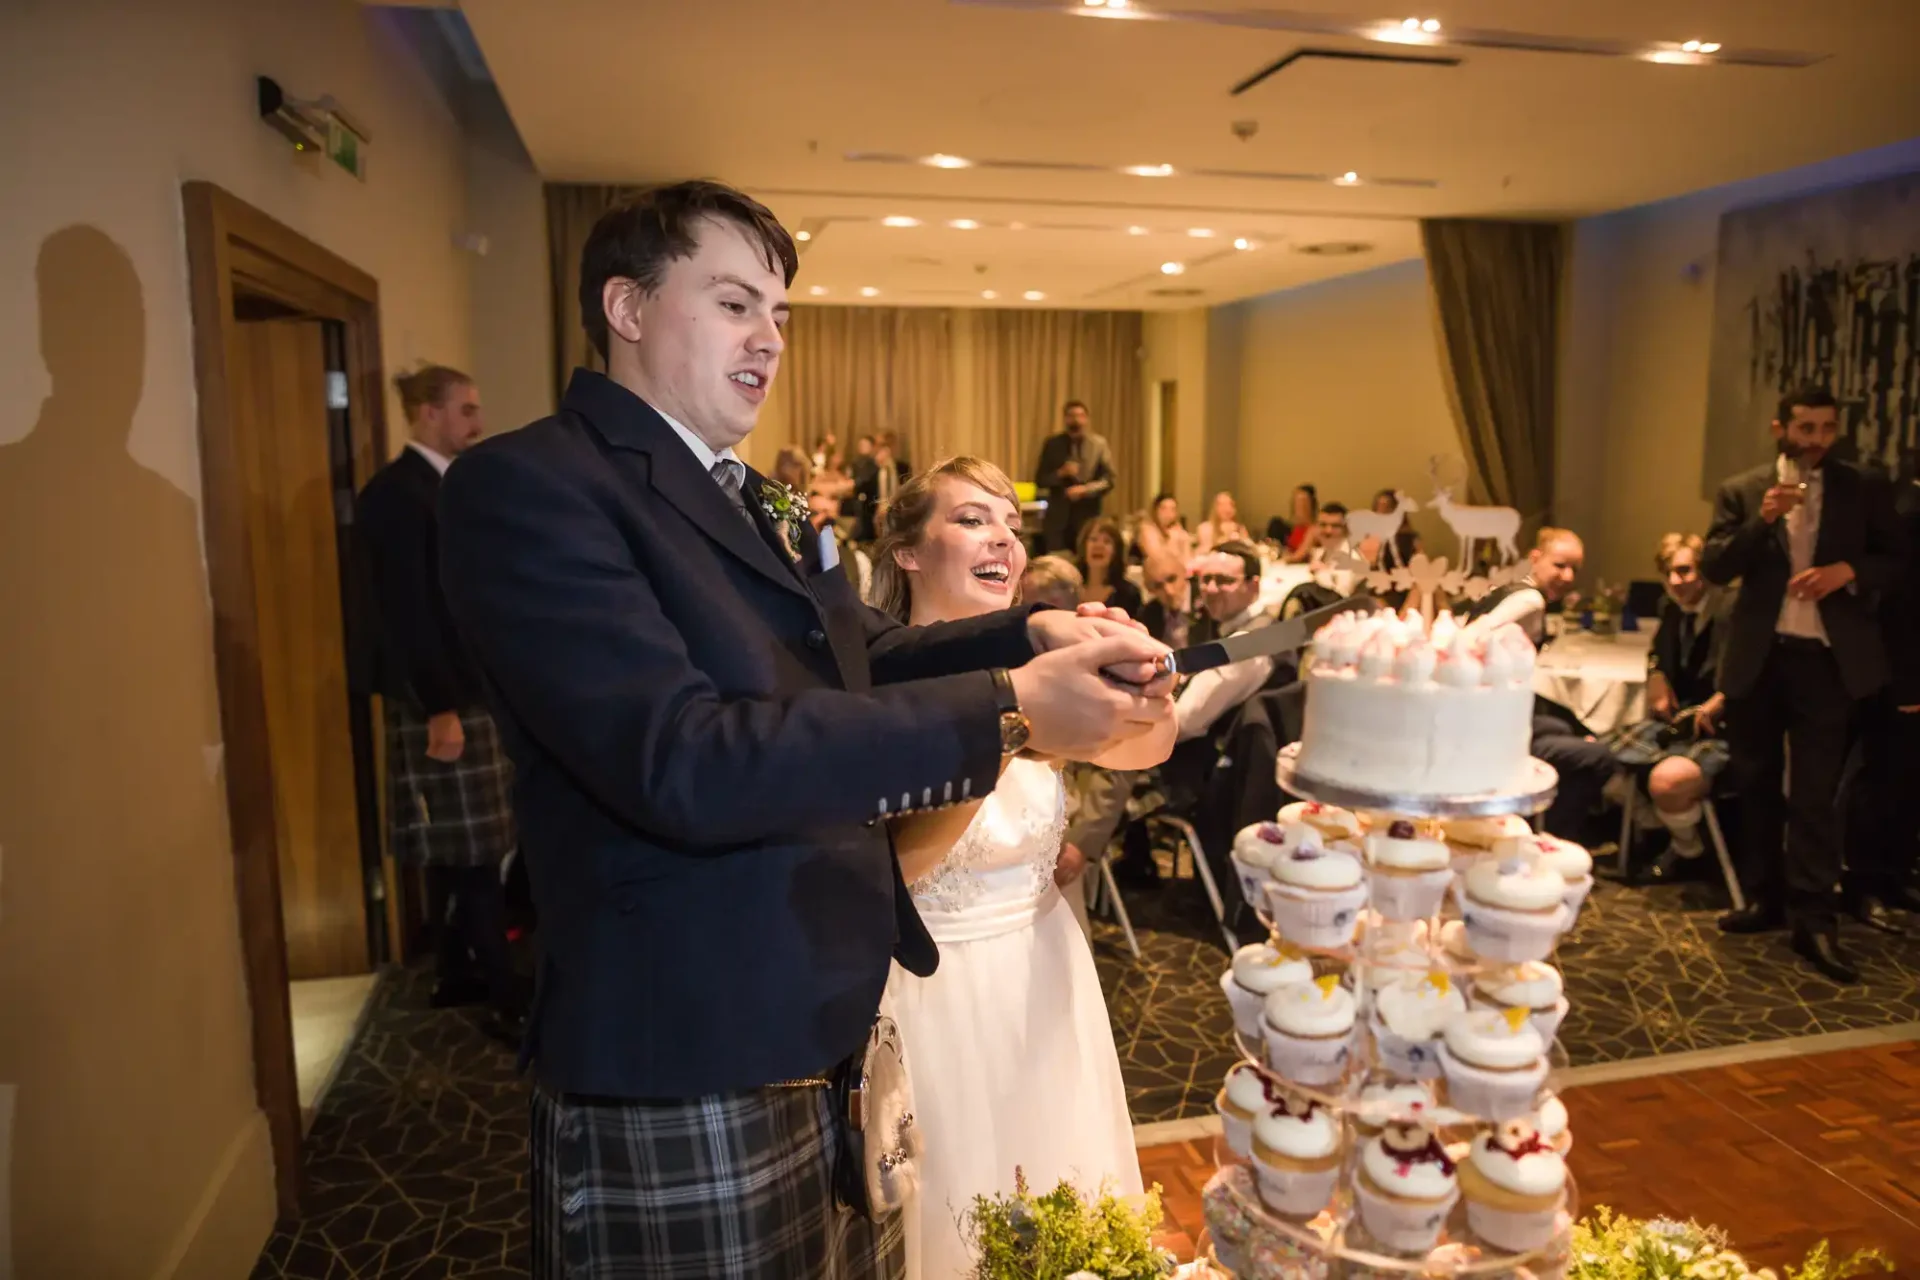 Bride and groom in formal attire cutting a tiered wedding cake at a reception hall, surrounded by guests.